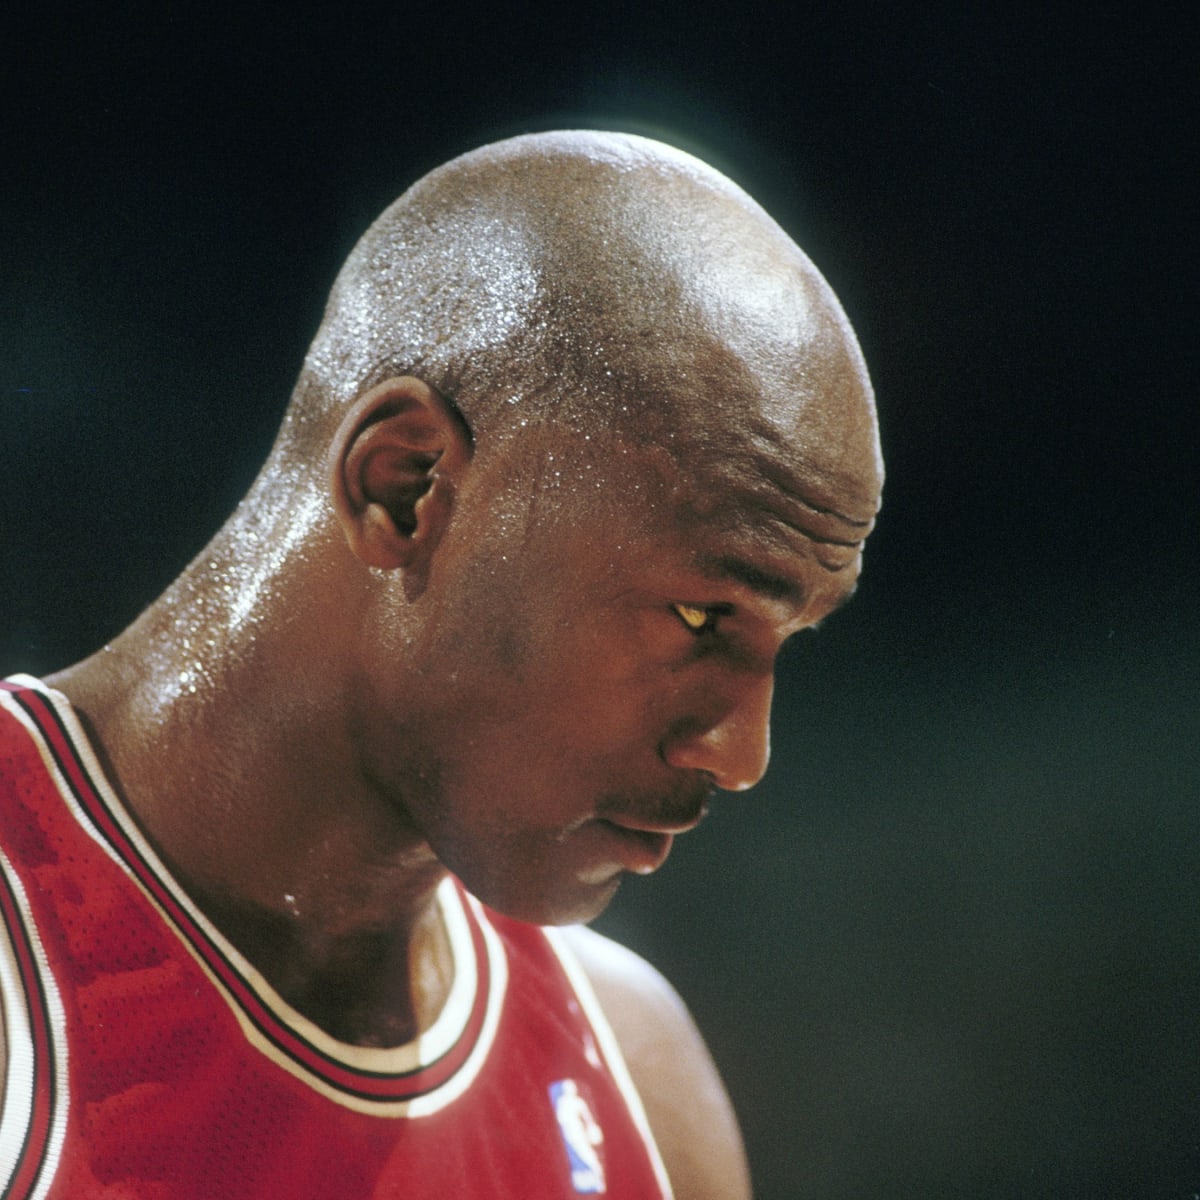 What if Michael Jordan played his entire career as a Small Forward